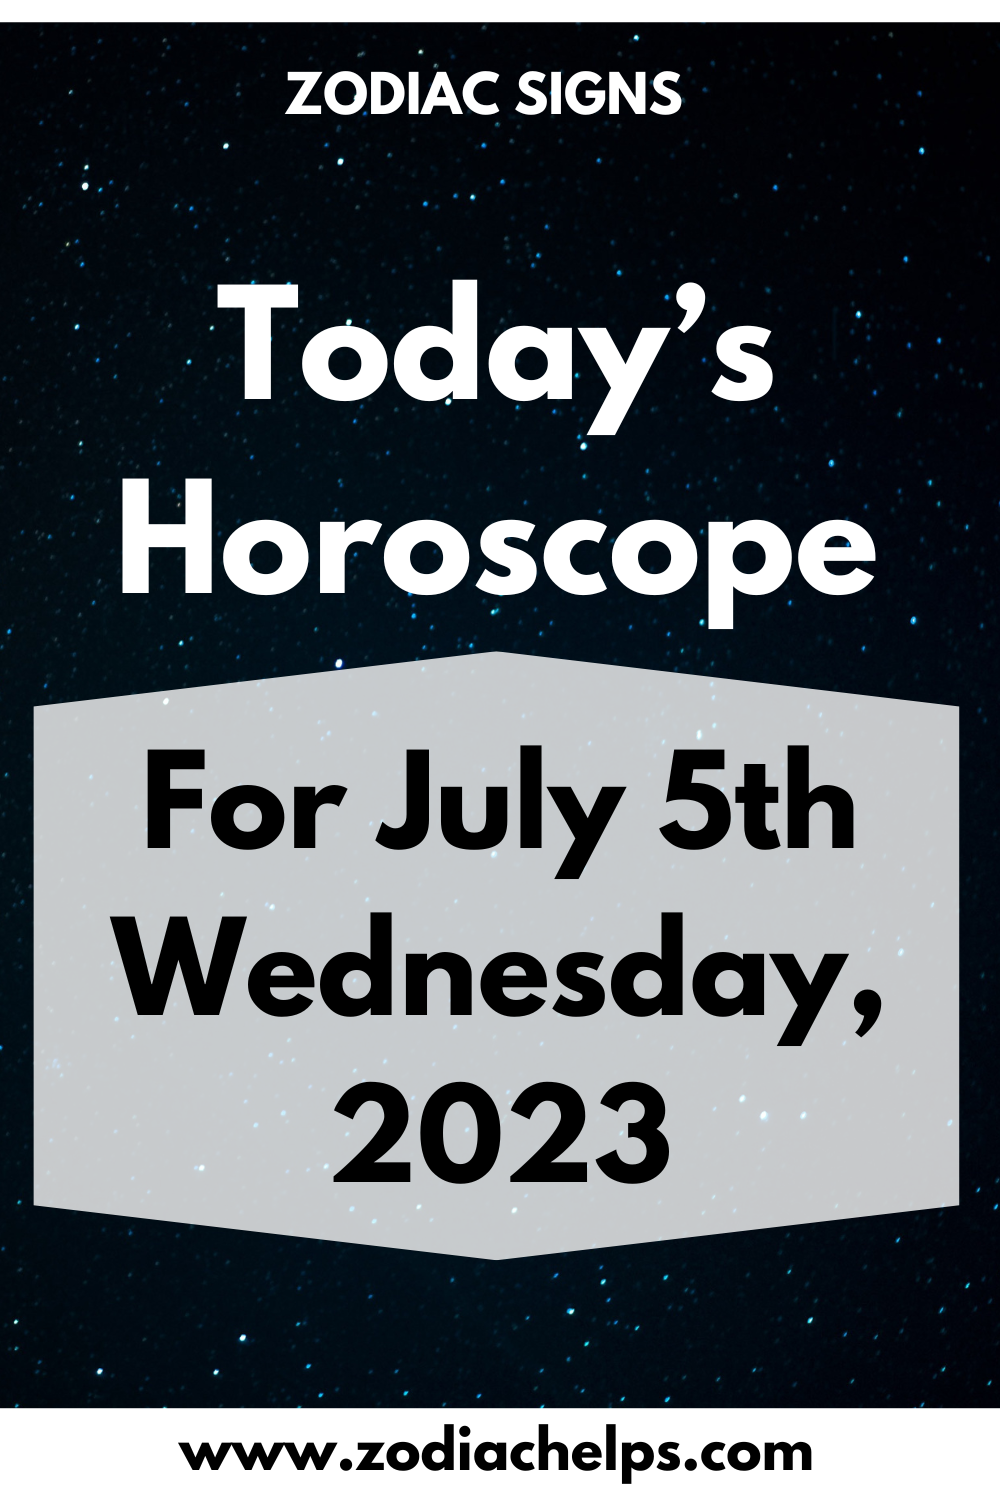 Today’s Horoscope for July 5th Wednesday, 2023